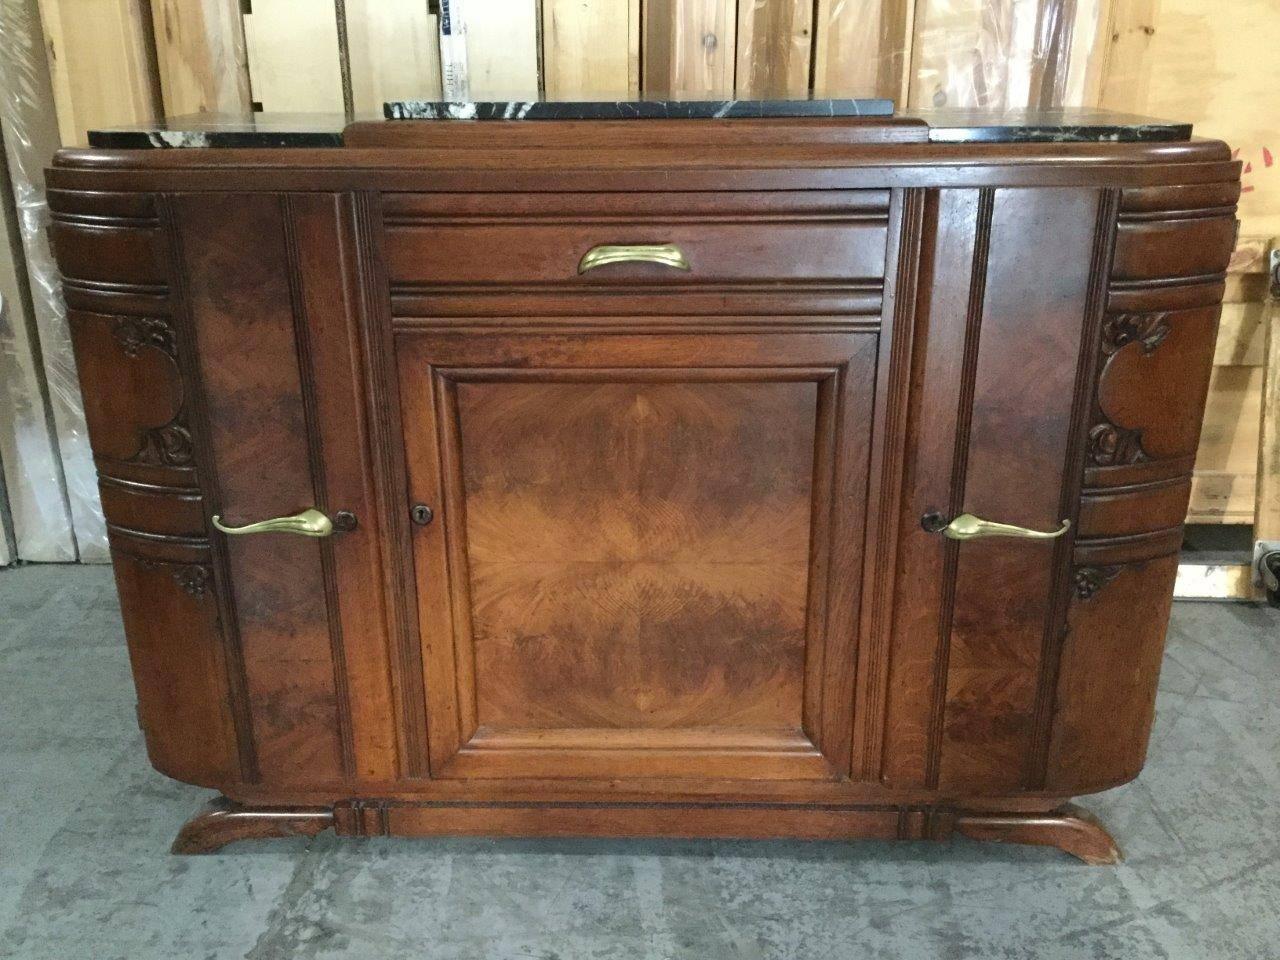 This period 1930s French Art Deco buffet features two rounded side doors for
storage, a central door and a drawer. Made of solid walnut, the top
features three elevated pieces of black marble with white veins. Carved accents
on the doors reflect